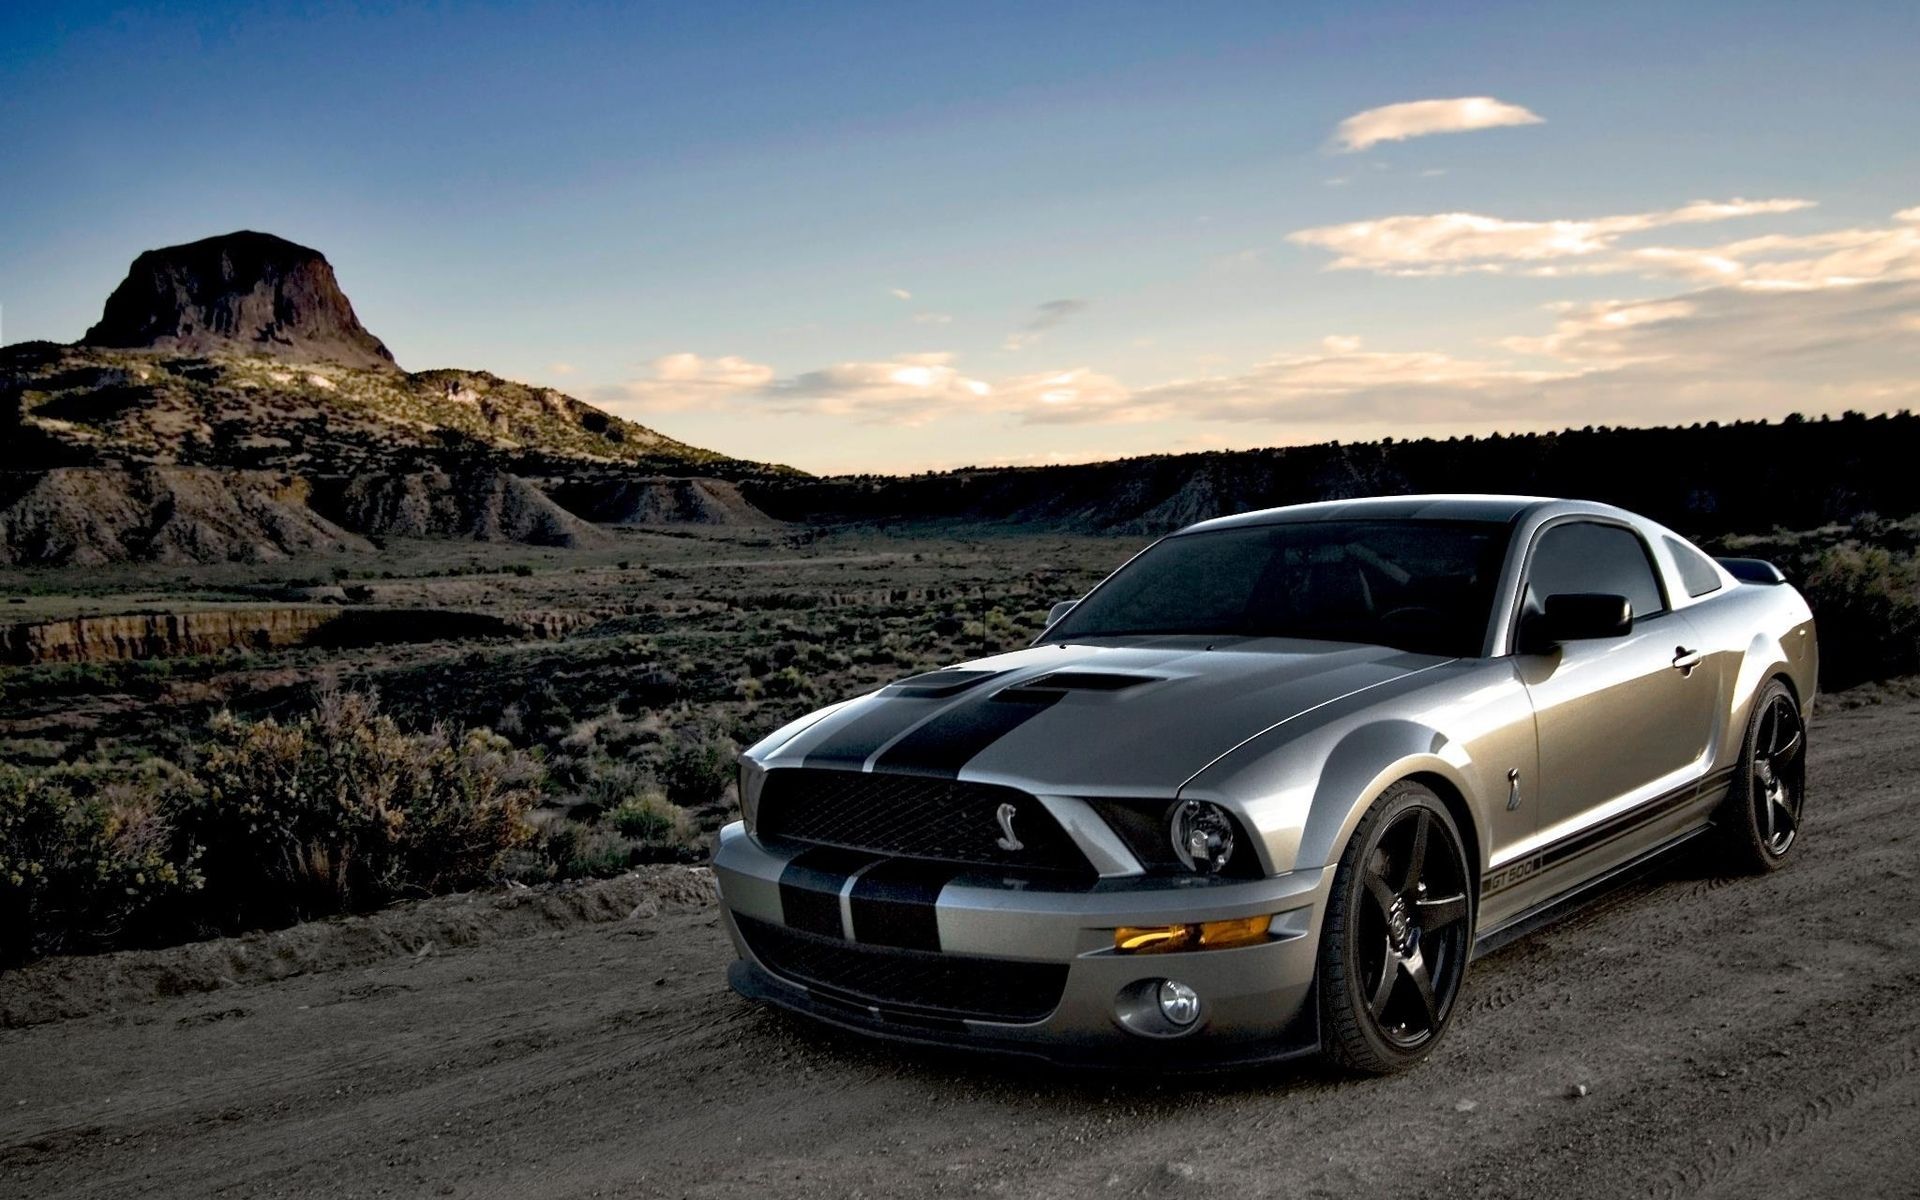 Mustang Hd Wallpaper - Hd Wallpaper Mustang , HD Wallpaper & Backgrounds